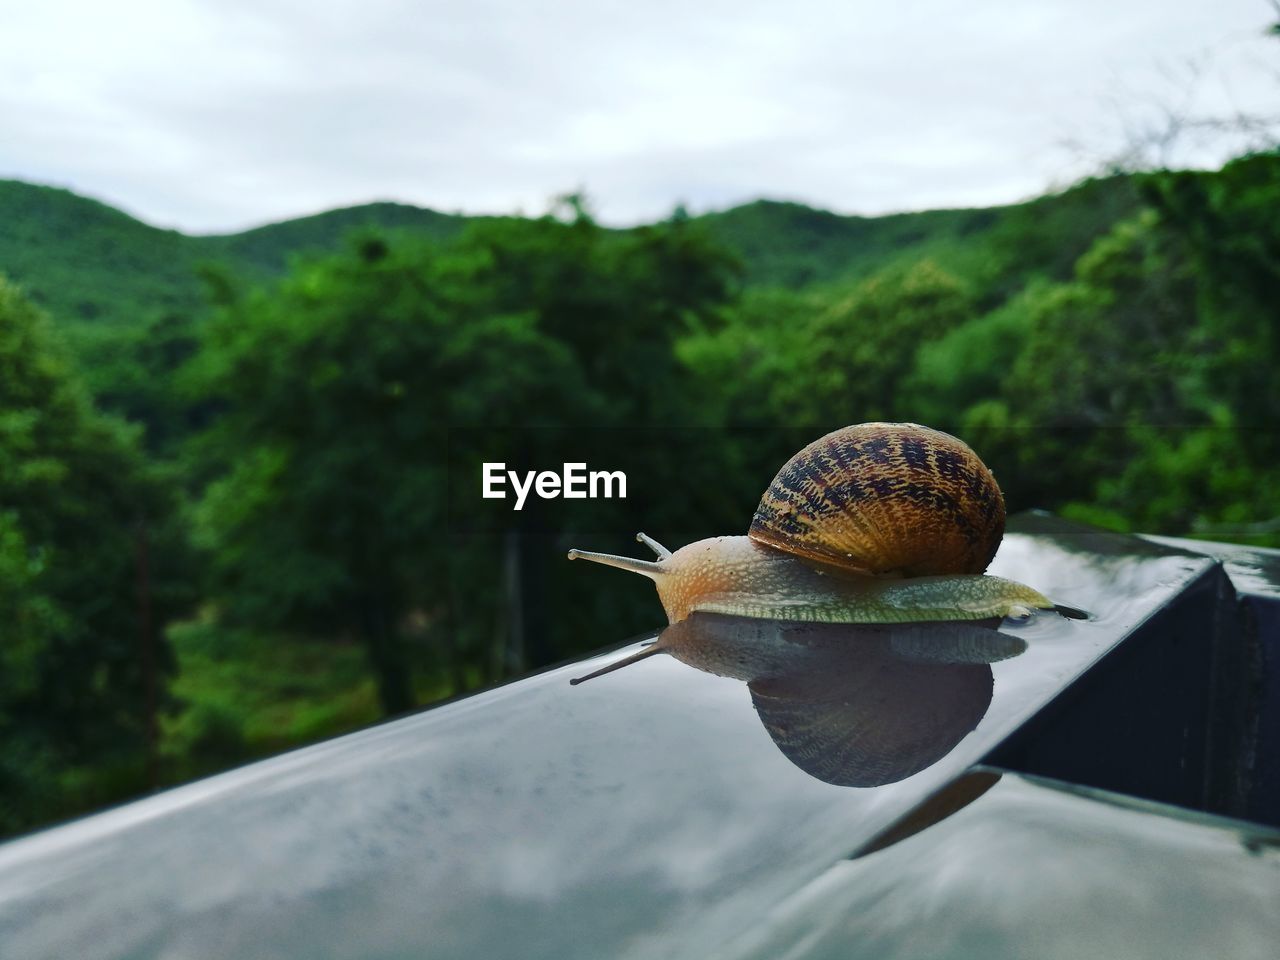 Close-up of snail on glass